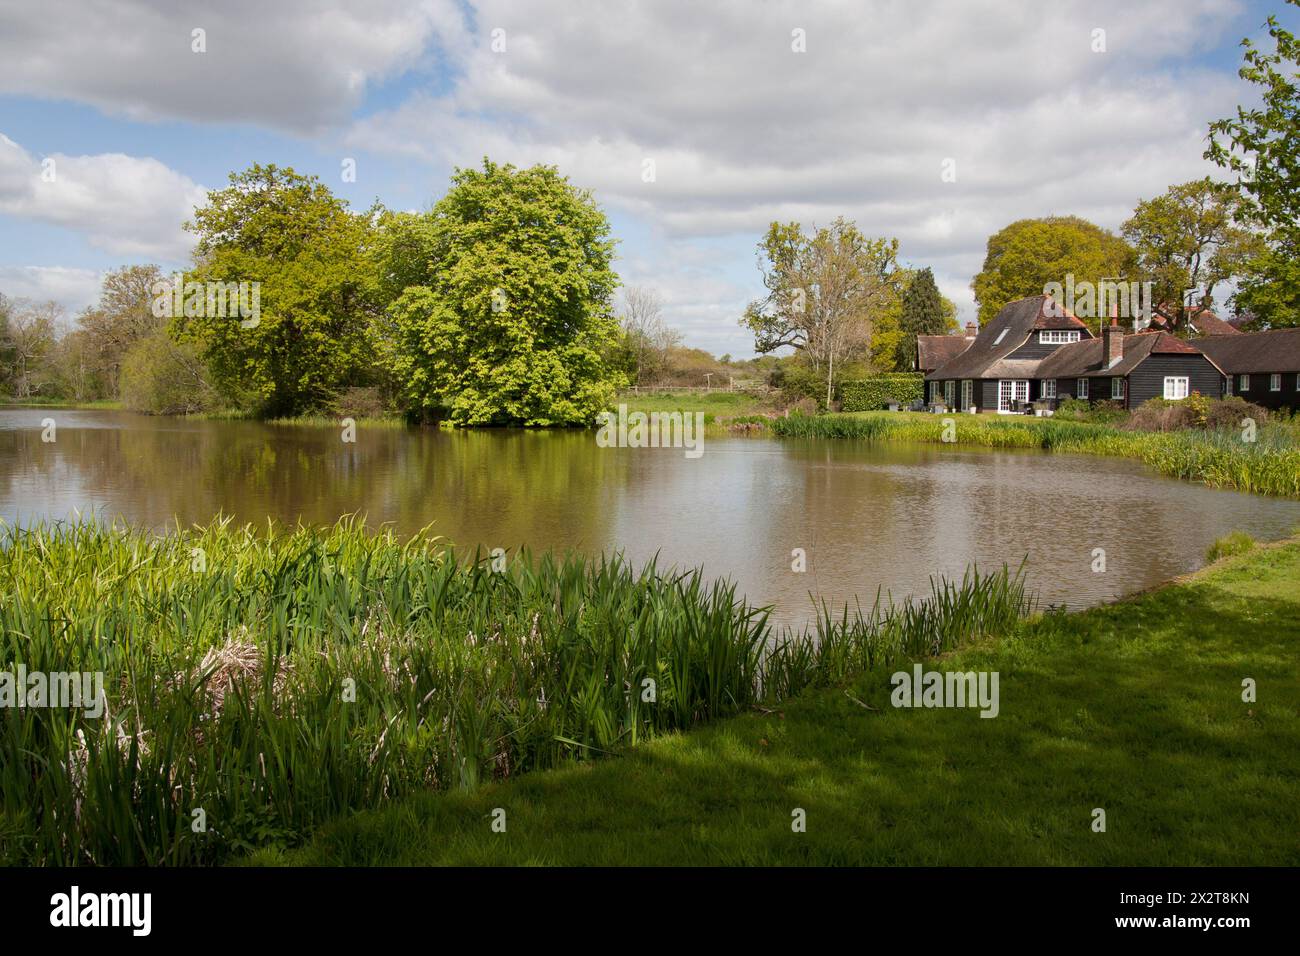 Shermanbury estate and artificial lake nr Horsham, west sussex, England Stock Photo